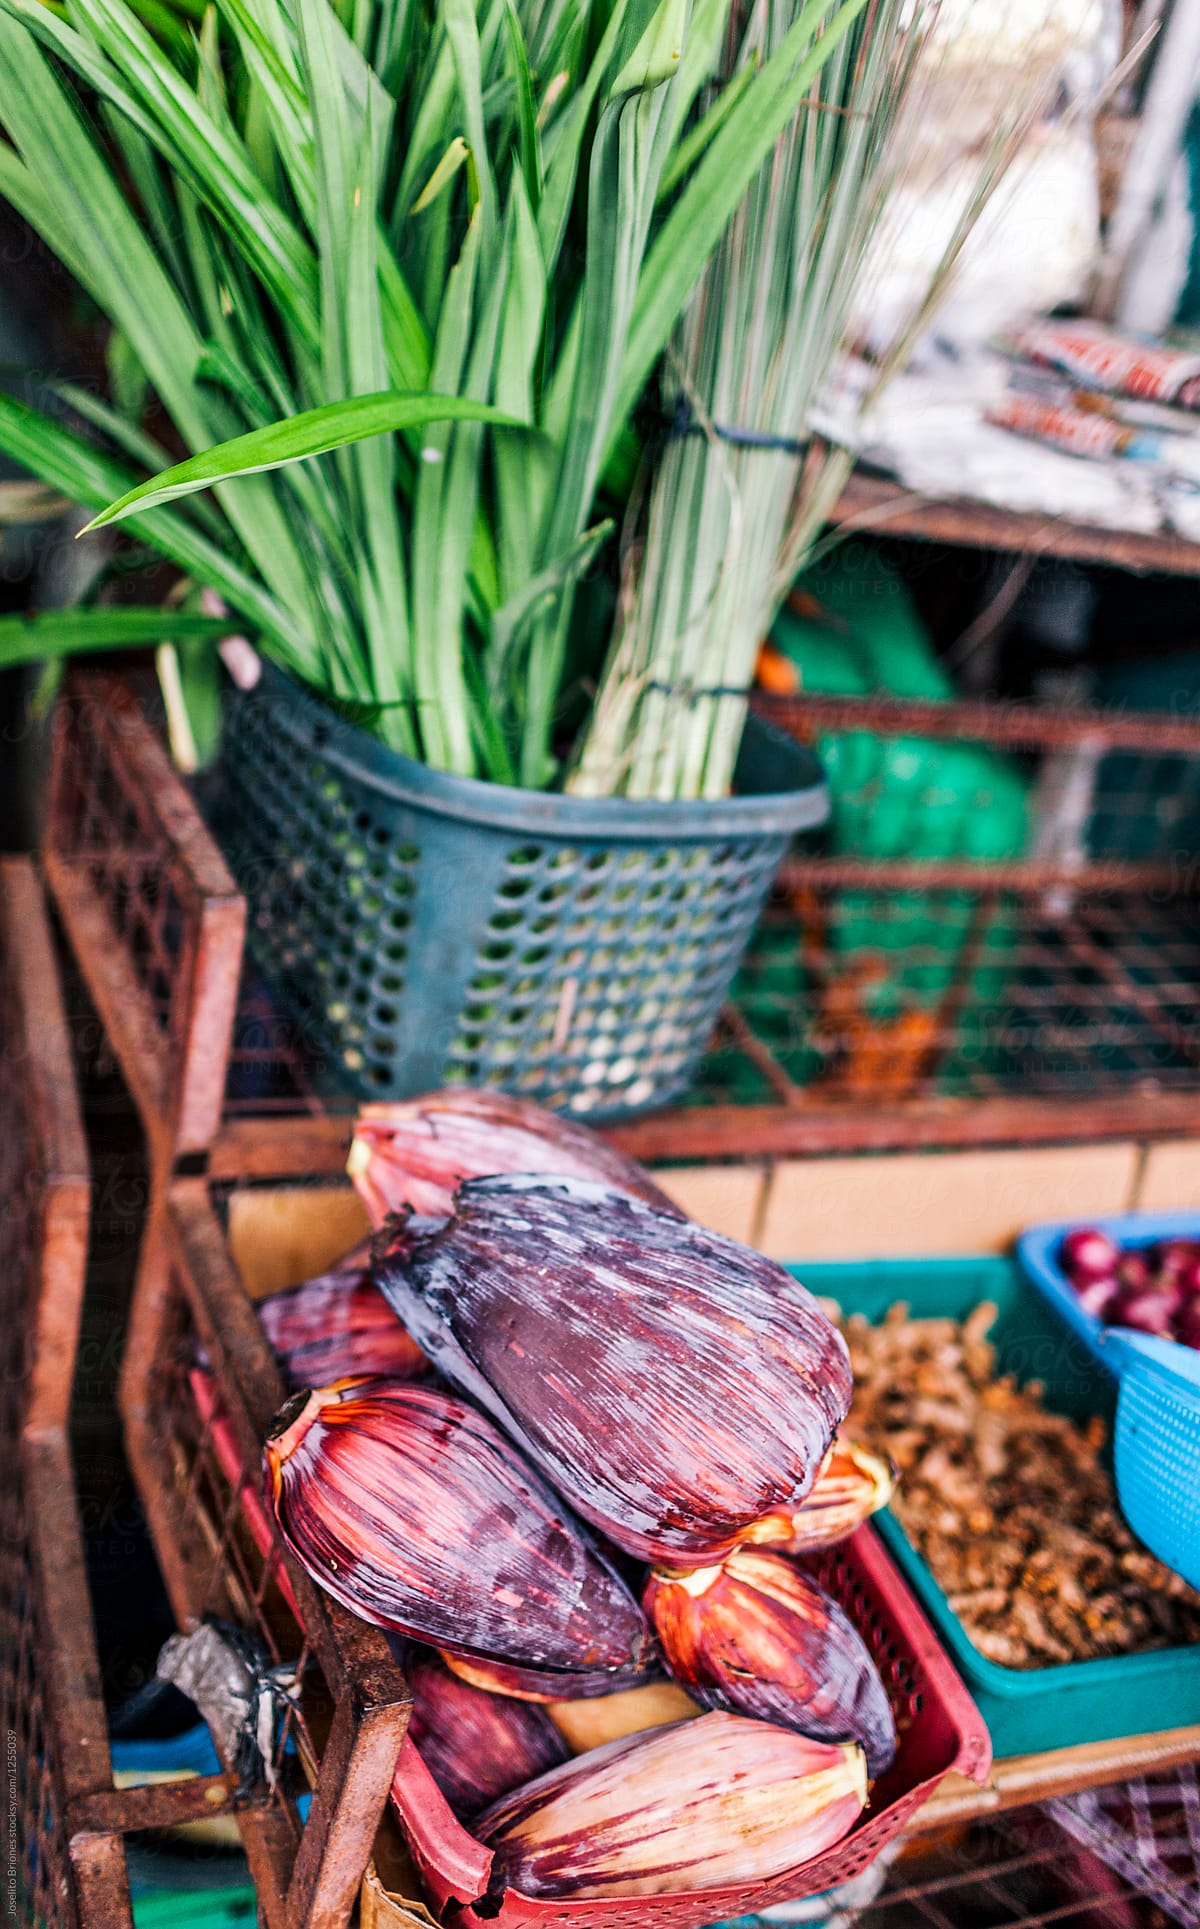 Pandan Leaves and Banana Flowers in Vegetable Stand in Public Market